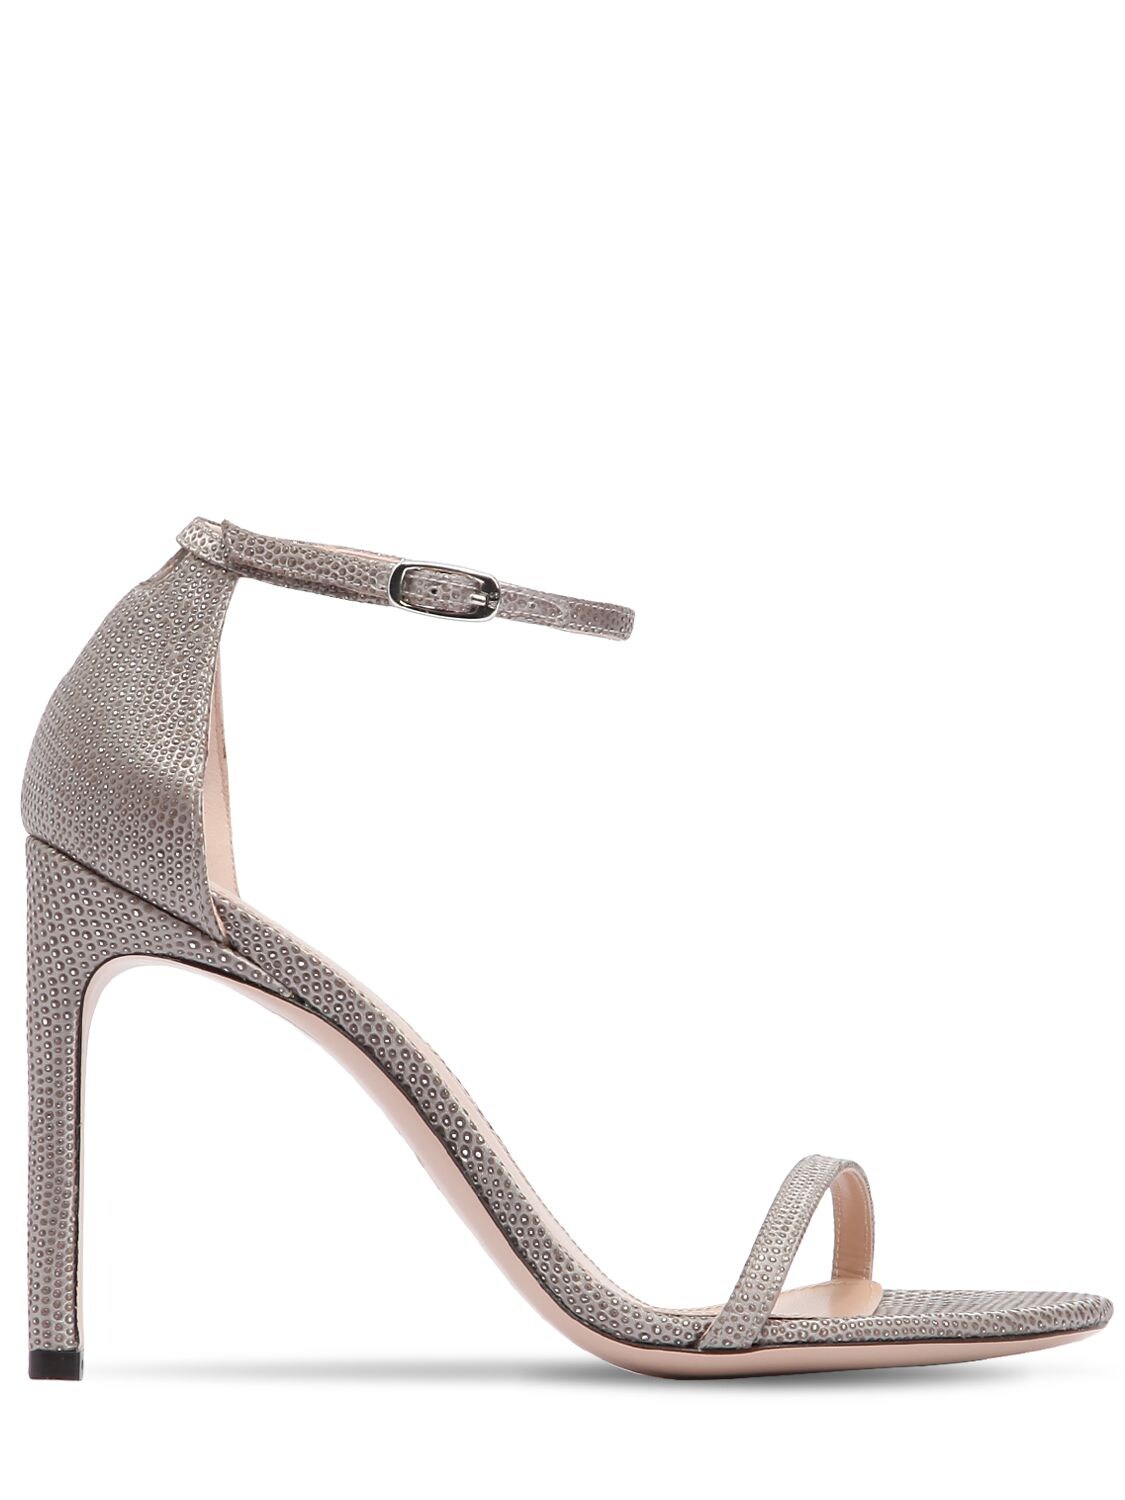 Stuart Weitzman 100mm Nudist Song Leather Sandals In Silver